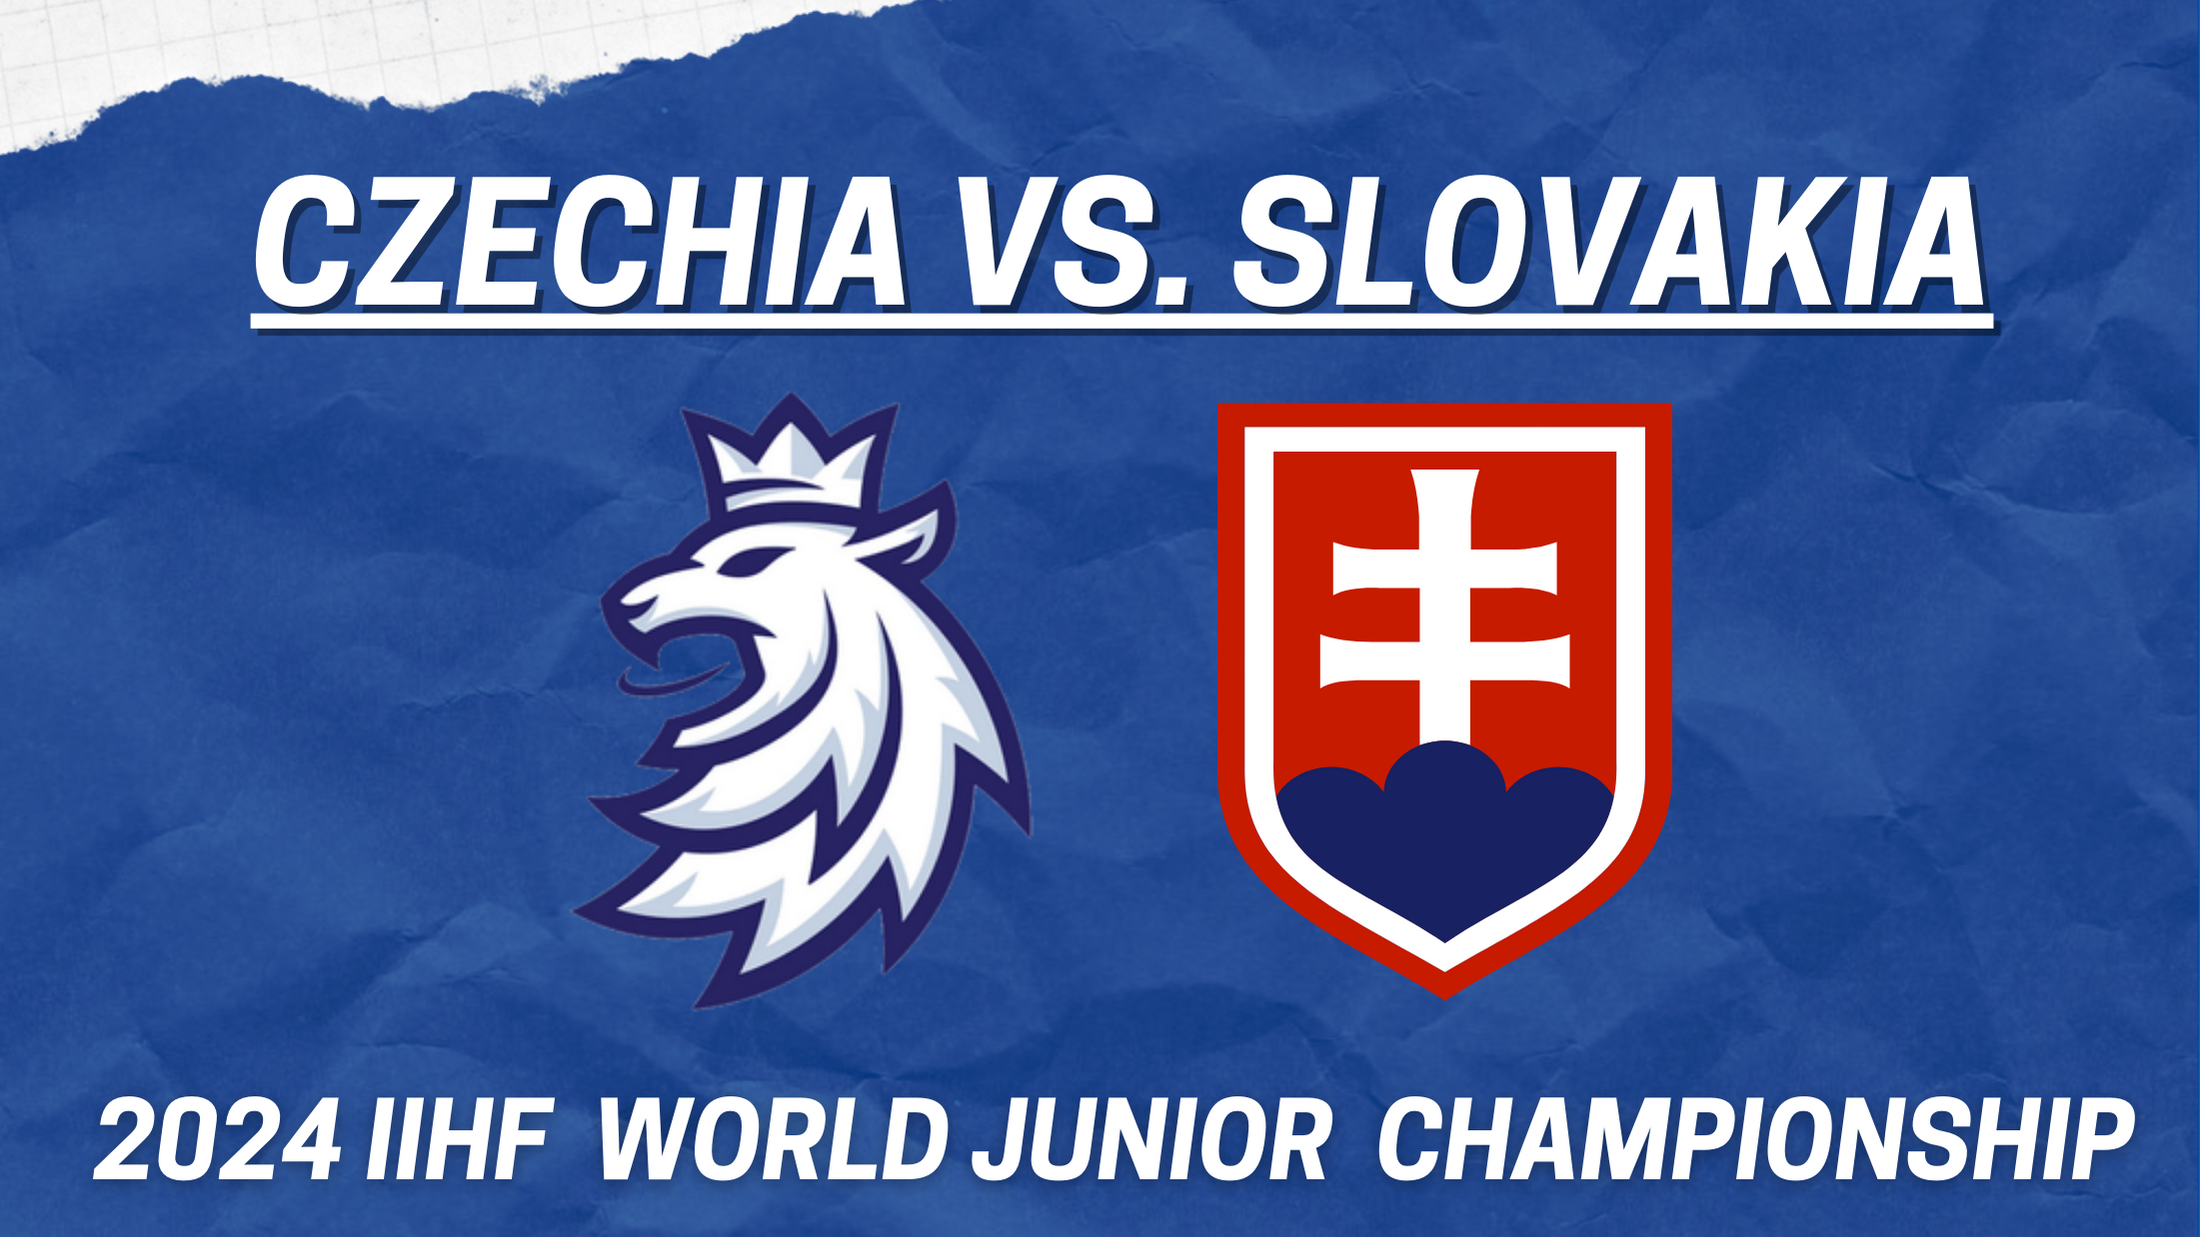 Top standouts from Czechia vs. Slovakia game at 2024 World Junior Championship